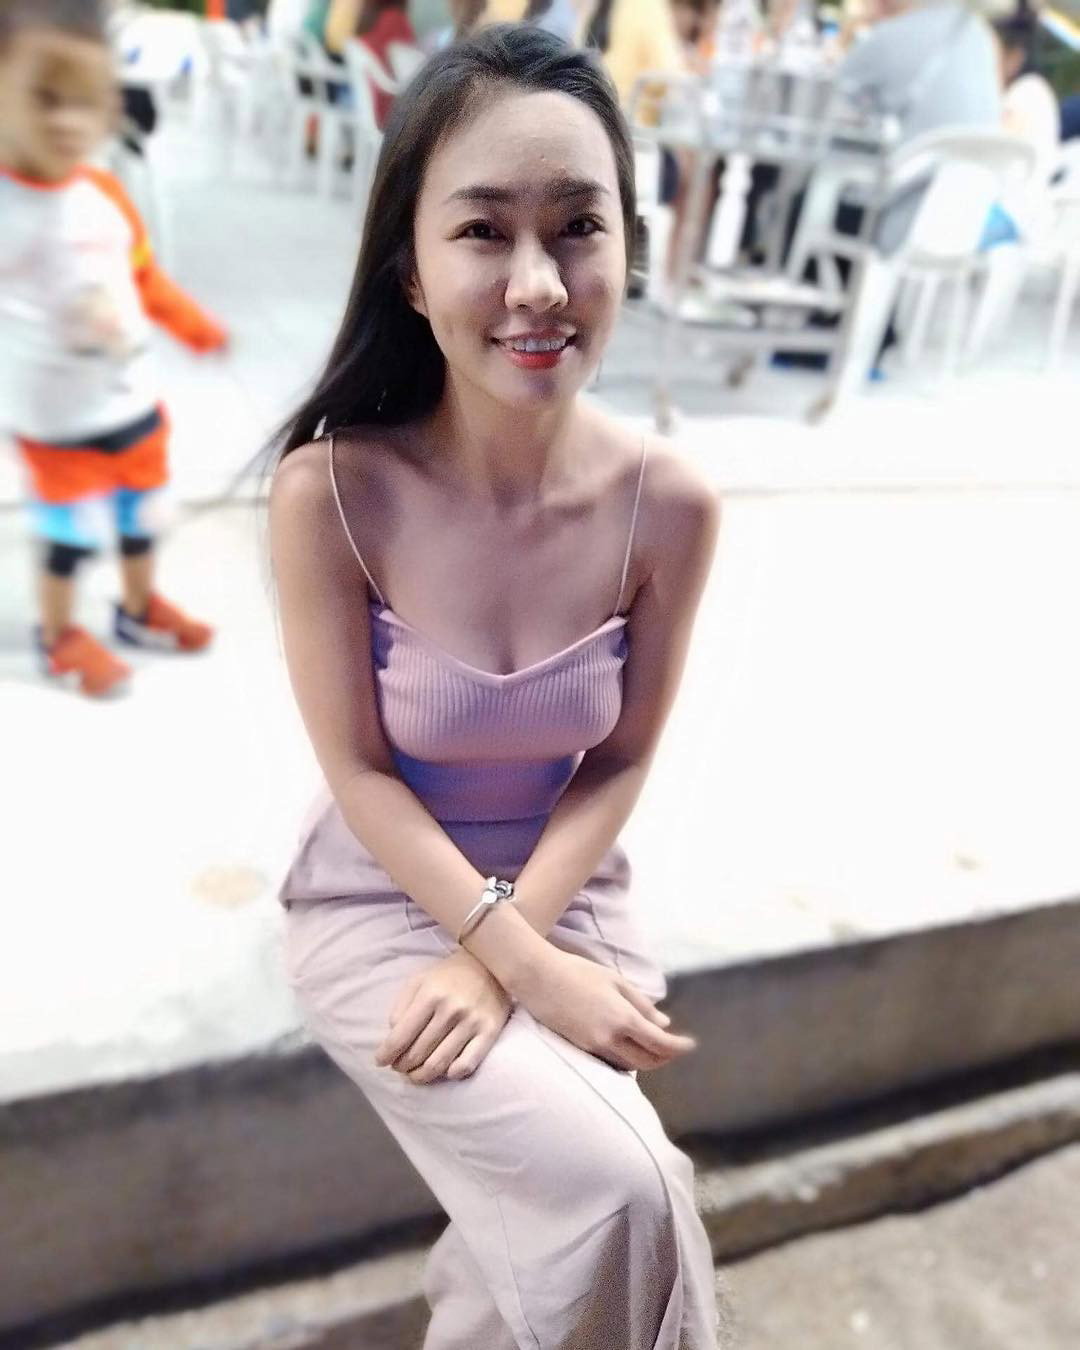 Watch the Photo by Your Thai Toy :) with the username @tabbycatasian, posted on June 11, 2019. The post is about the topic Busty Petite. and the text says '<3'